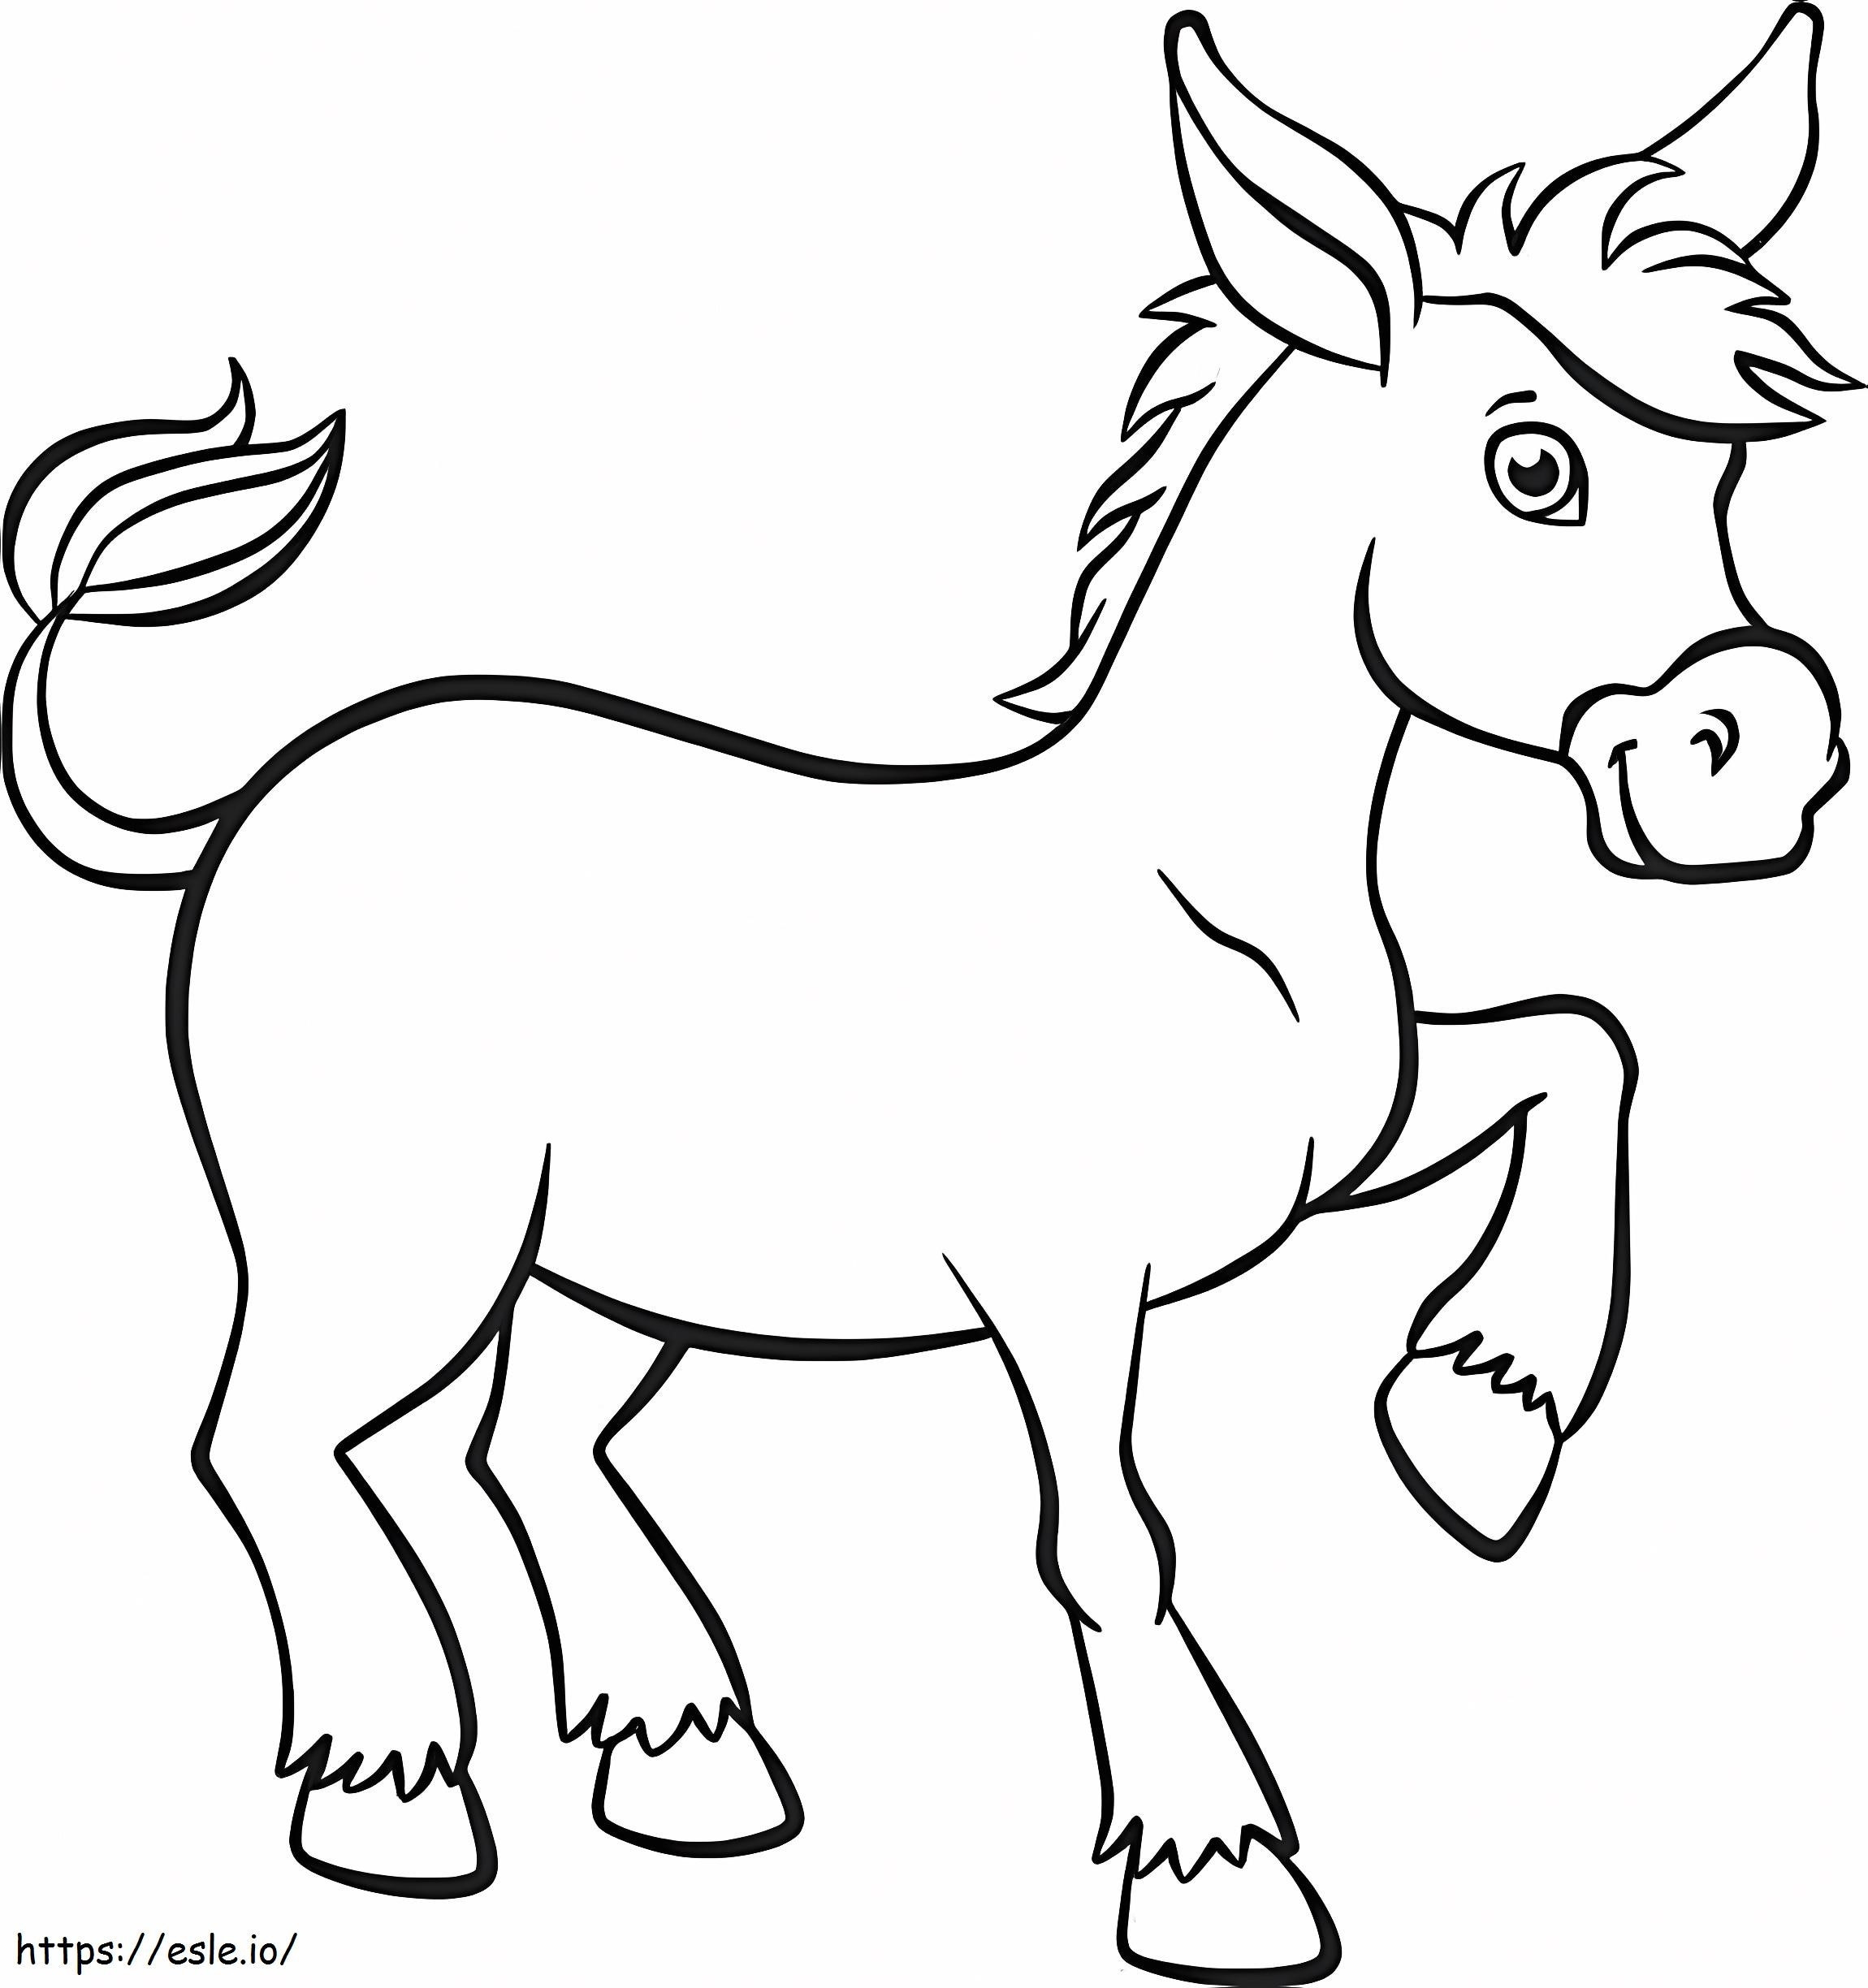 Simple Donkey coloring page